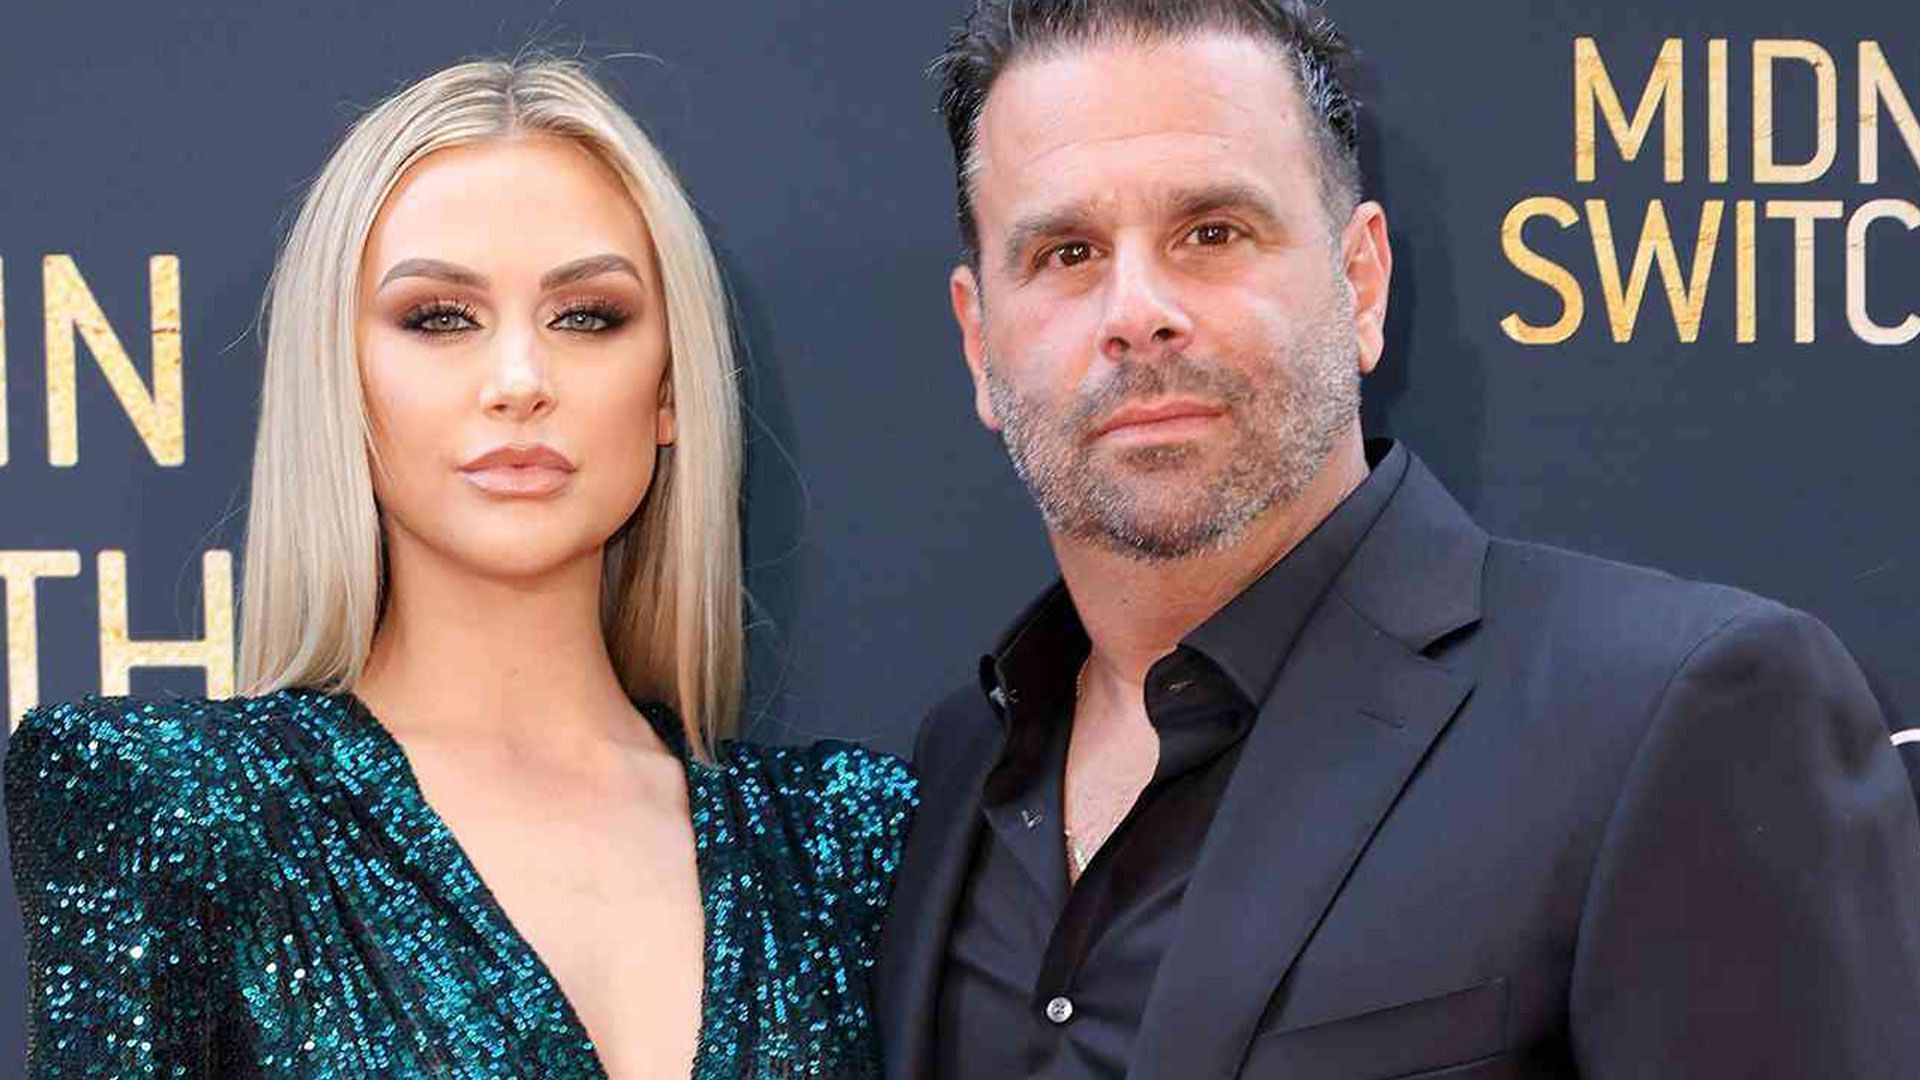 Randall Emmett and Lala Kent at the Midnight in Switchgrass premiere in 2021 (Image via IMDb)